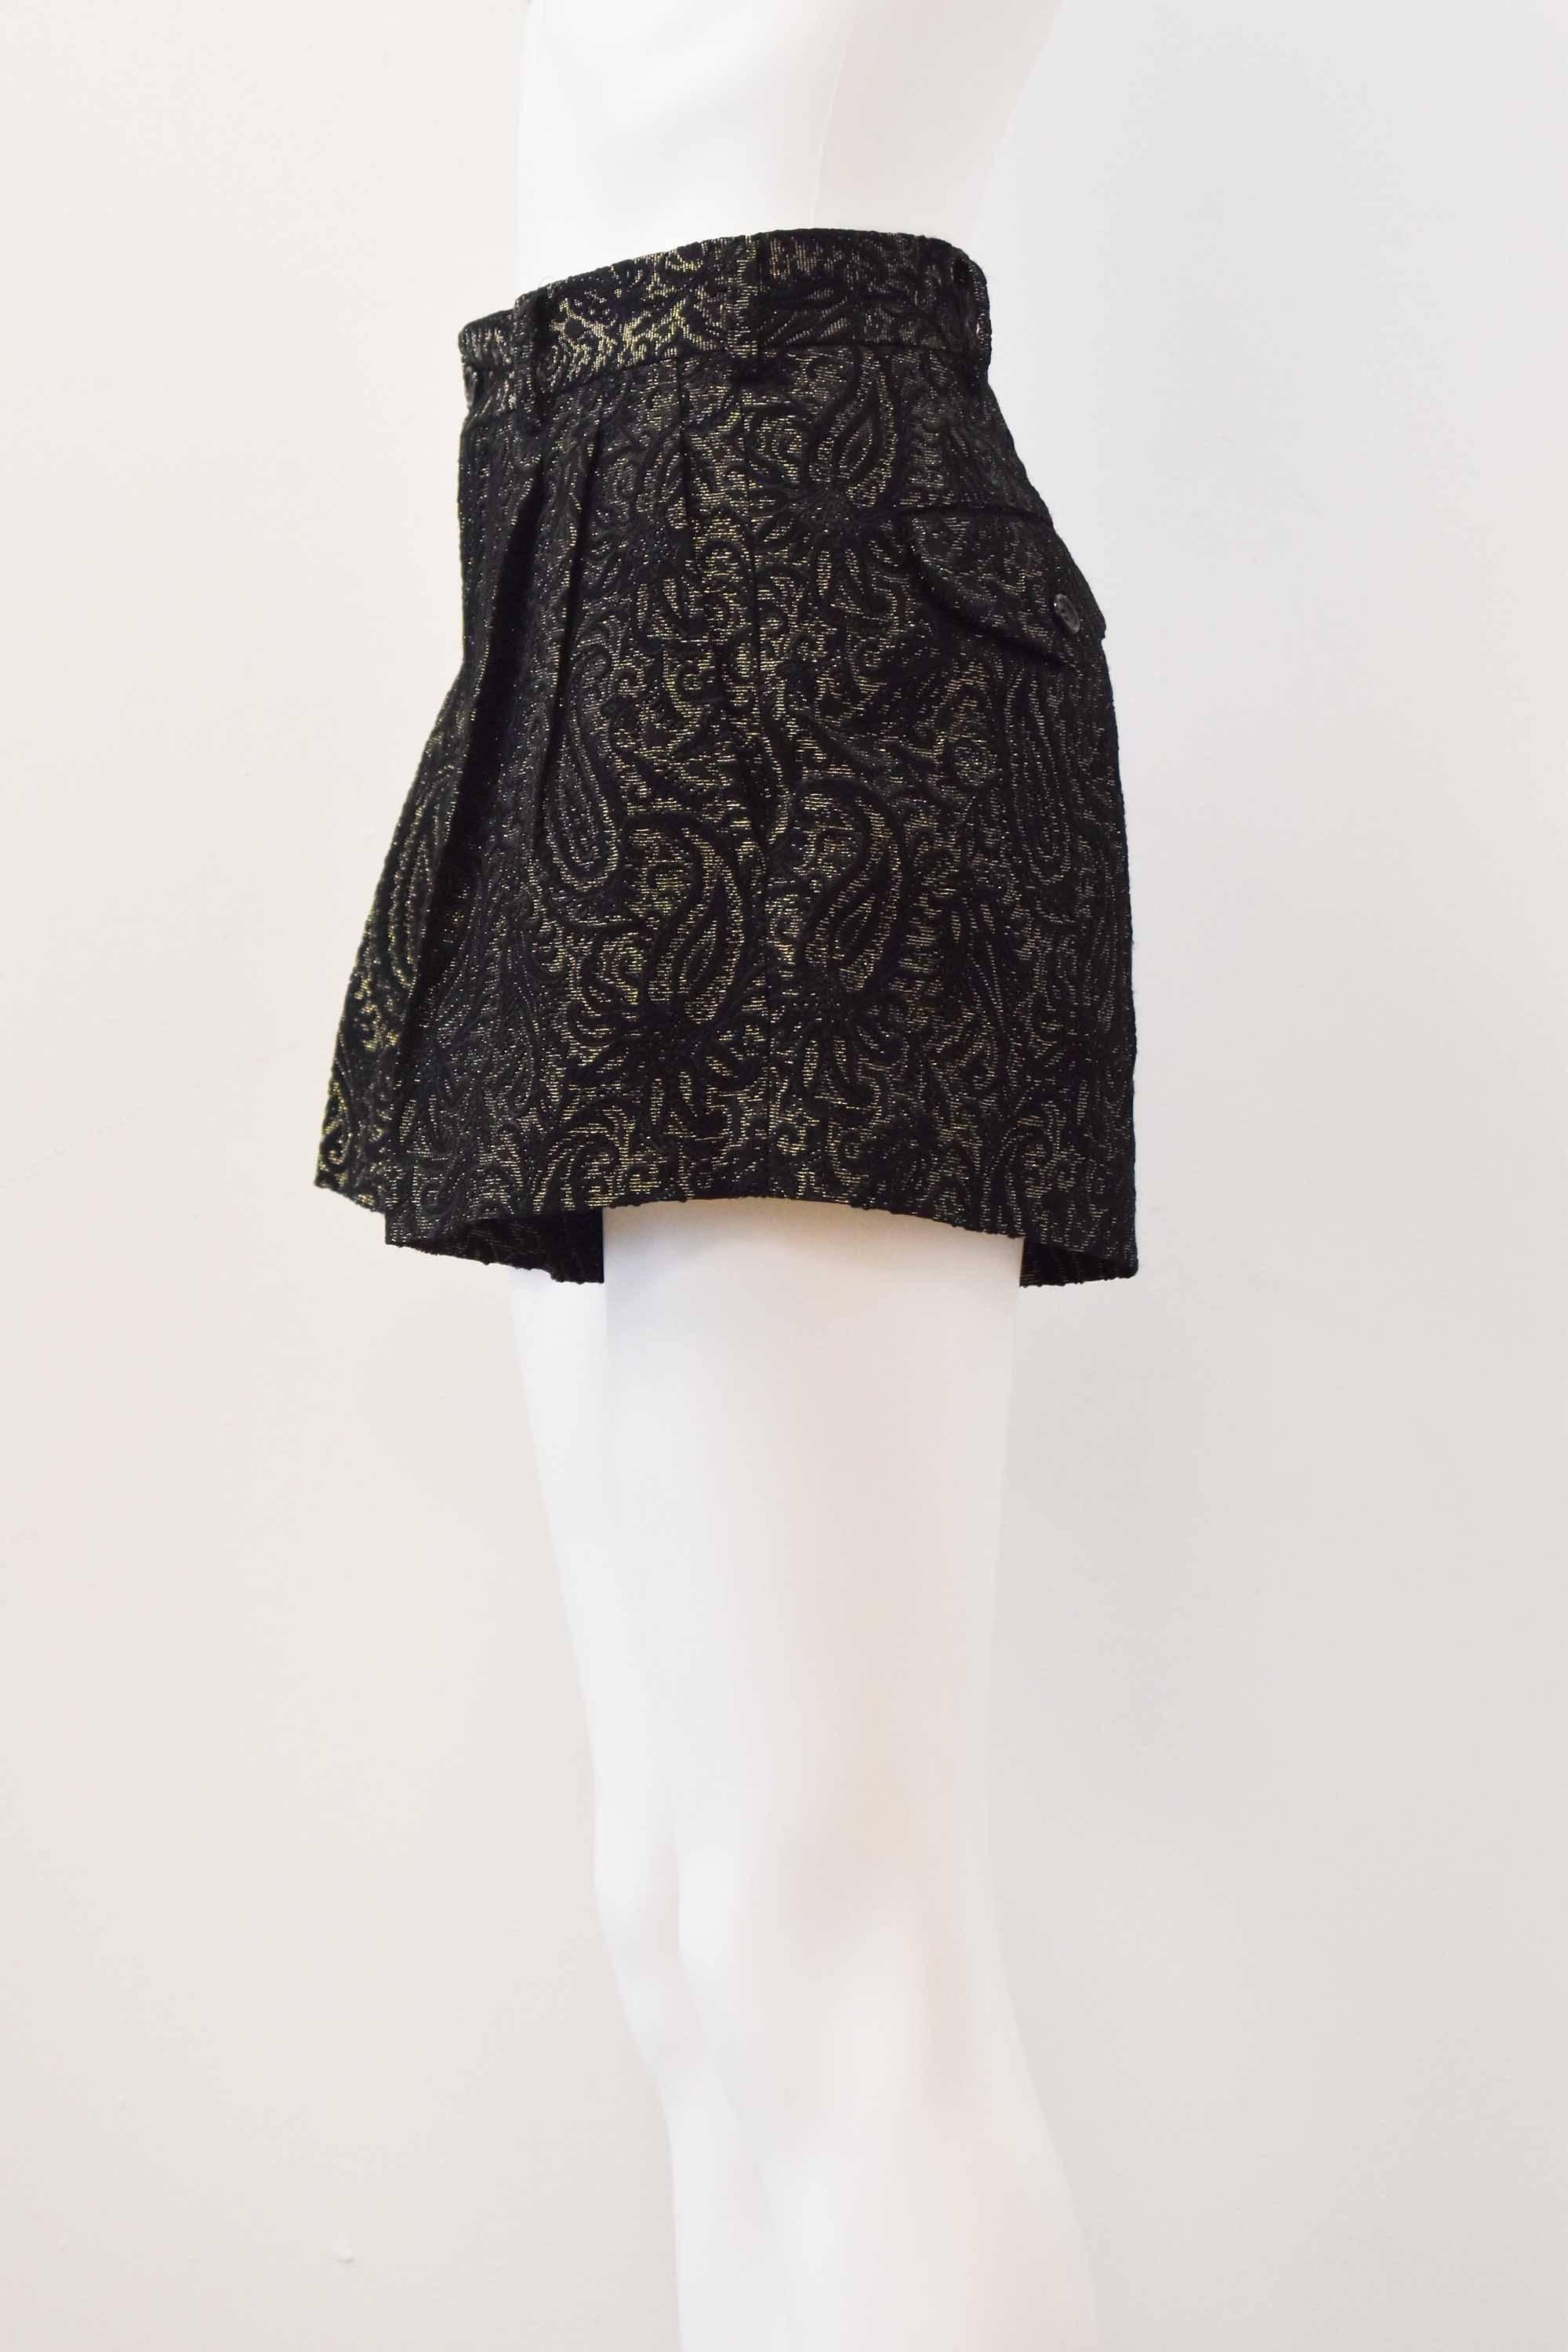 Comme des Garcons Black and Gold Brocade Shorts 2011 1